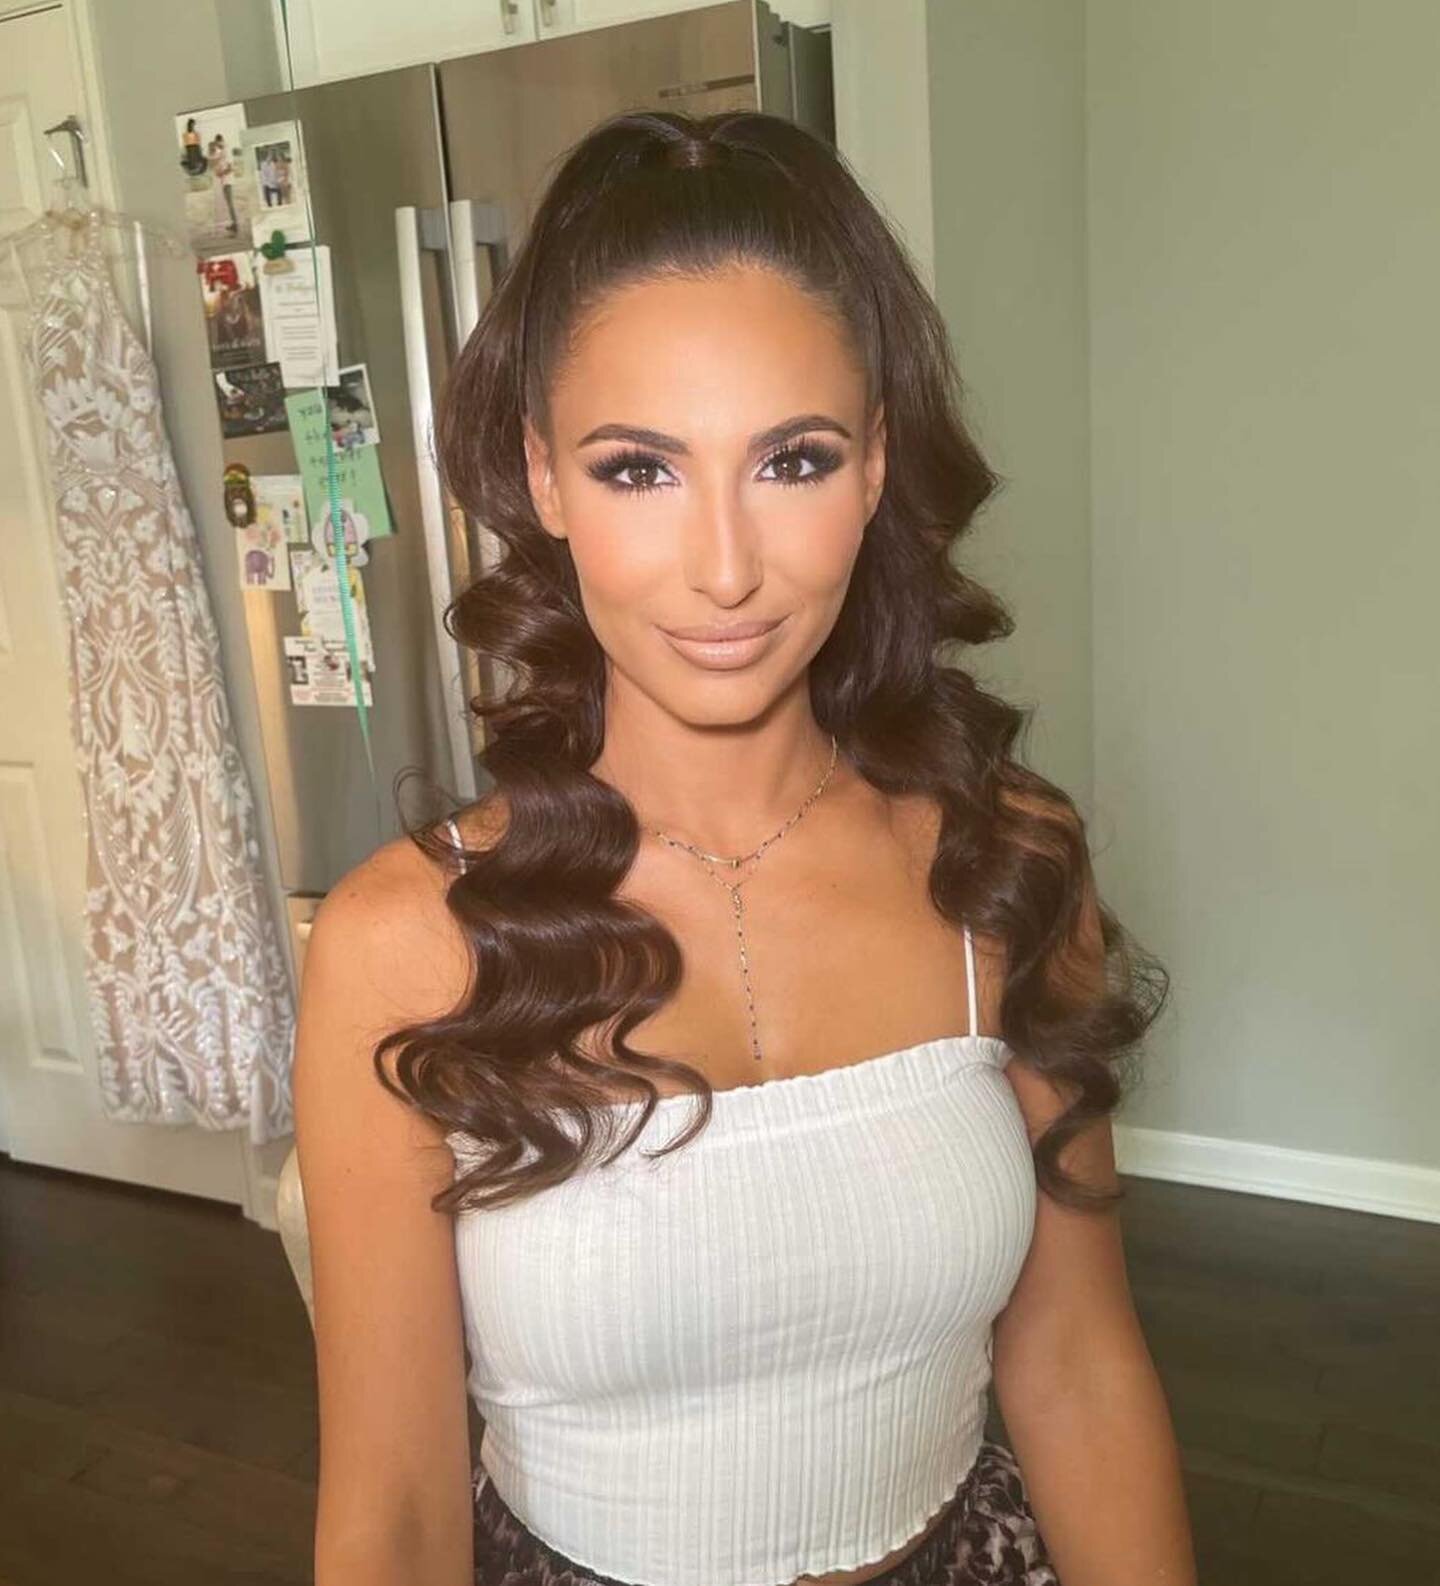 How stunning is this babe 💕
Makeup by: @glambyalexnatoli 
✨C O N T A C T✨
For bookings, inquiries &amp; all other info
Link in Bio to book
💌VMbeautyy@gmail.com
.
.
.
.
.
.
#hair #hairextentions #tapeins #wedding #bride #bridal #monmouthcounty #midd